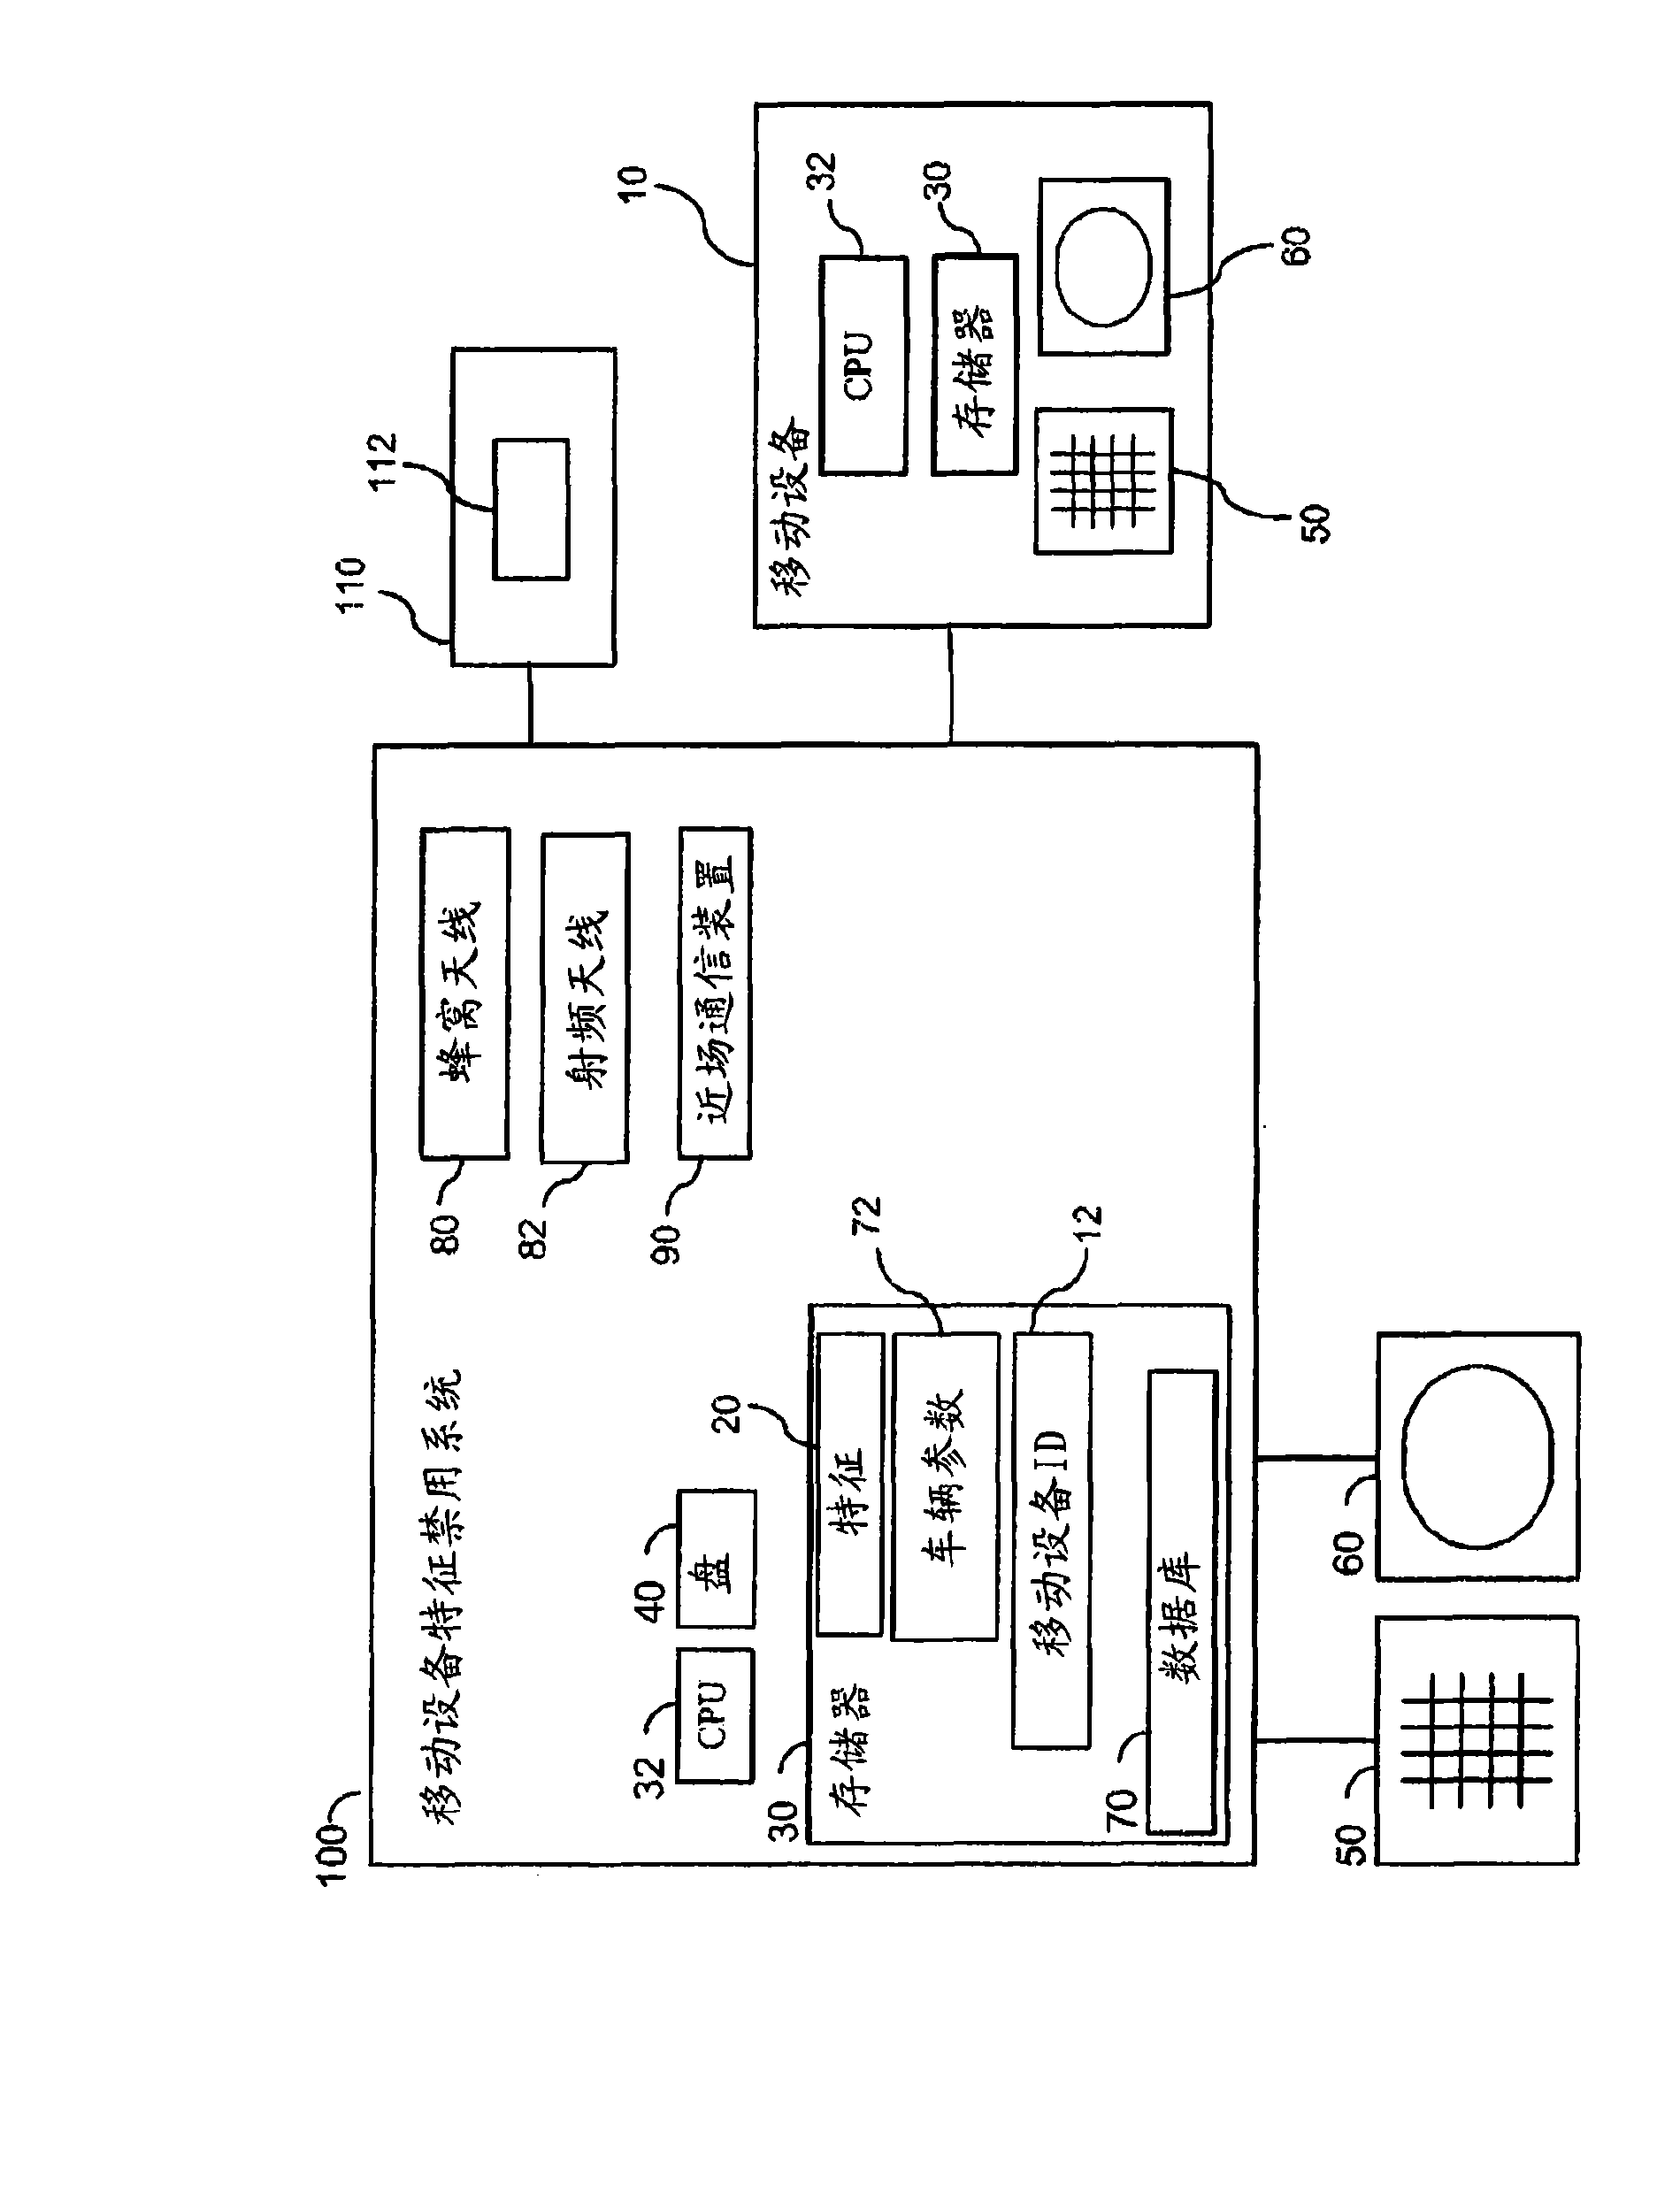 System and method for restricting driver mobile device feature usage while vehicle is in motion